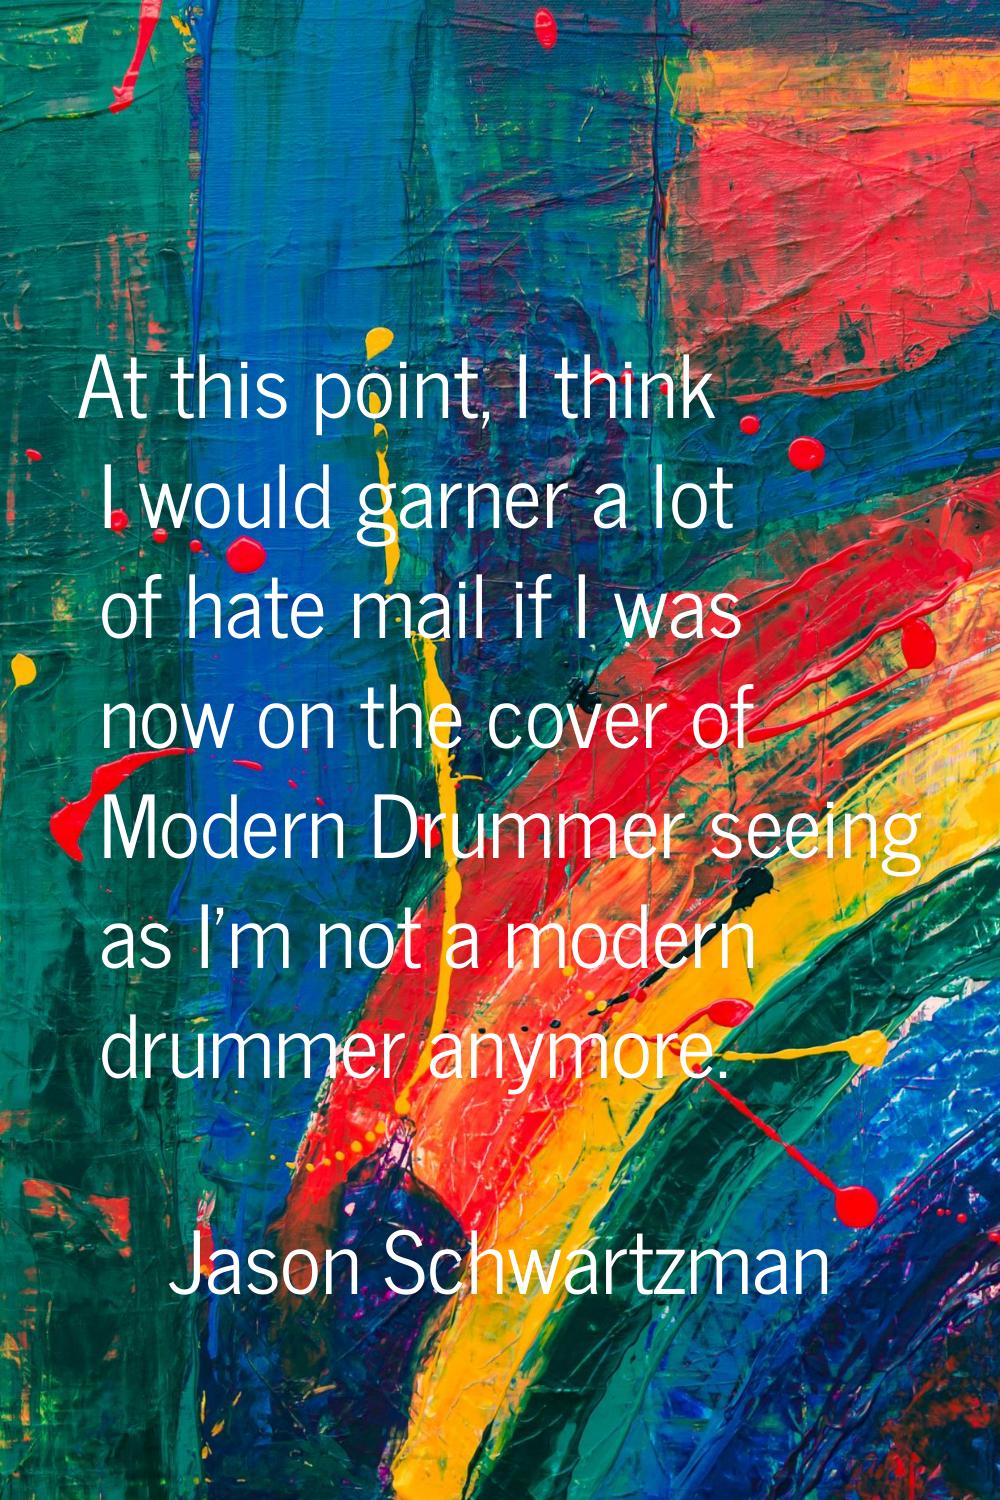 At this point, I think I would garner a lot of hate mail if I was now on the cover of Modern Drumme